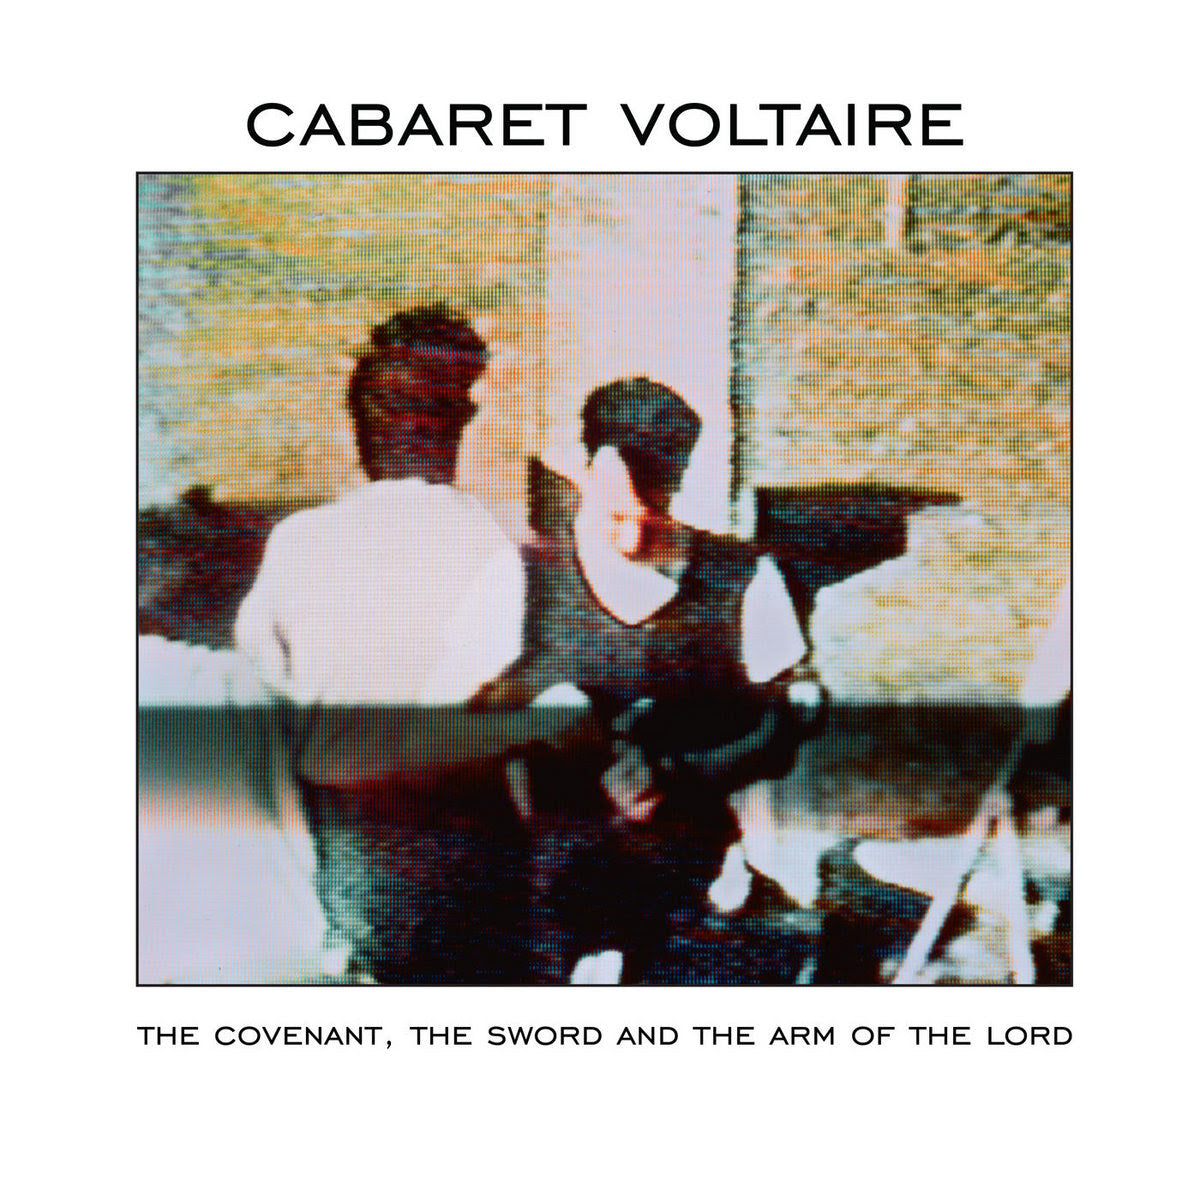 Cabaret Voltaire - The Covenant, The Sword and the Lord | Vinyl LP